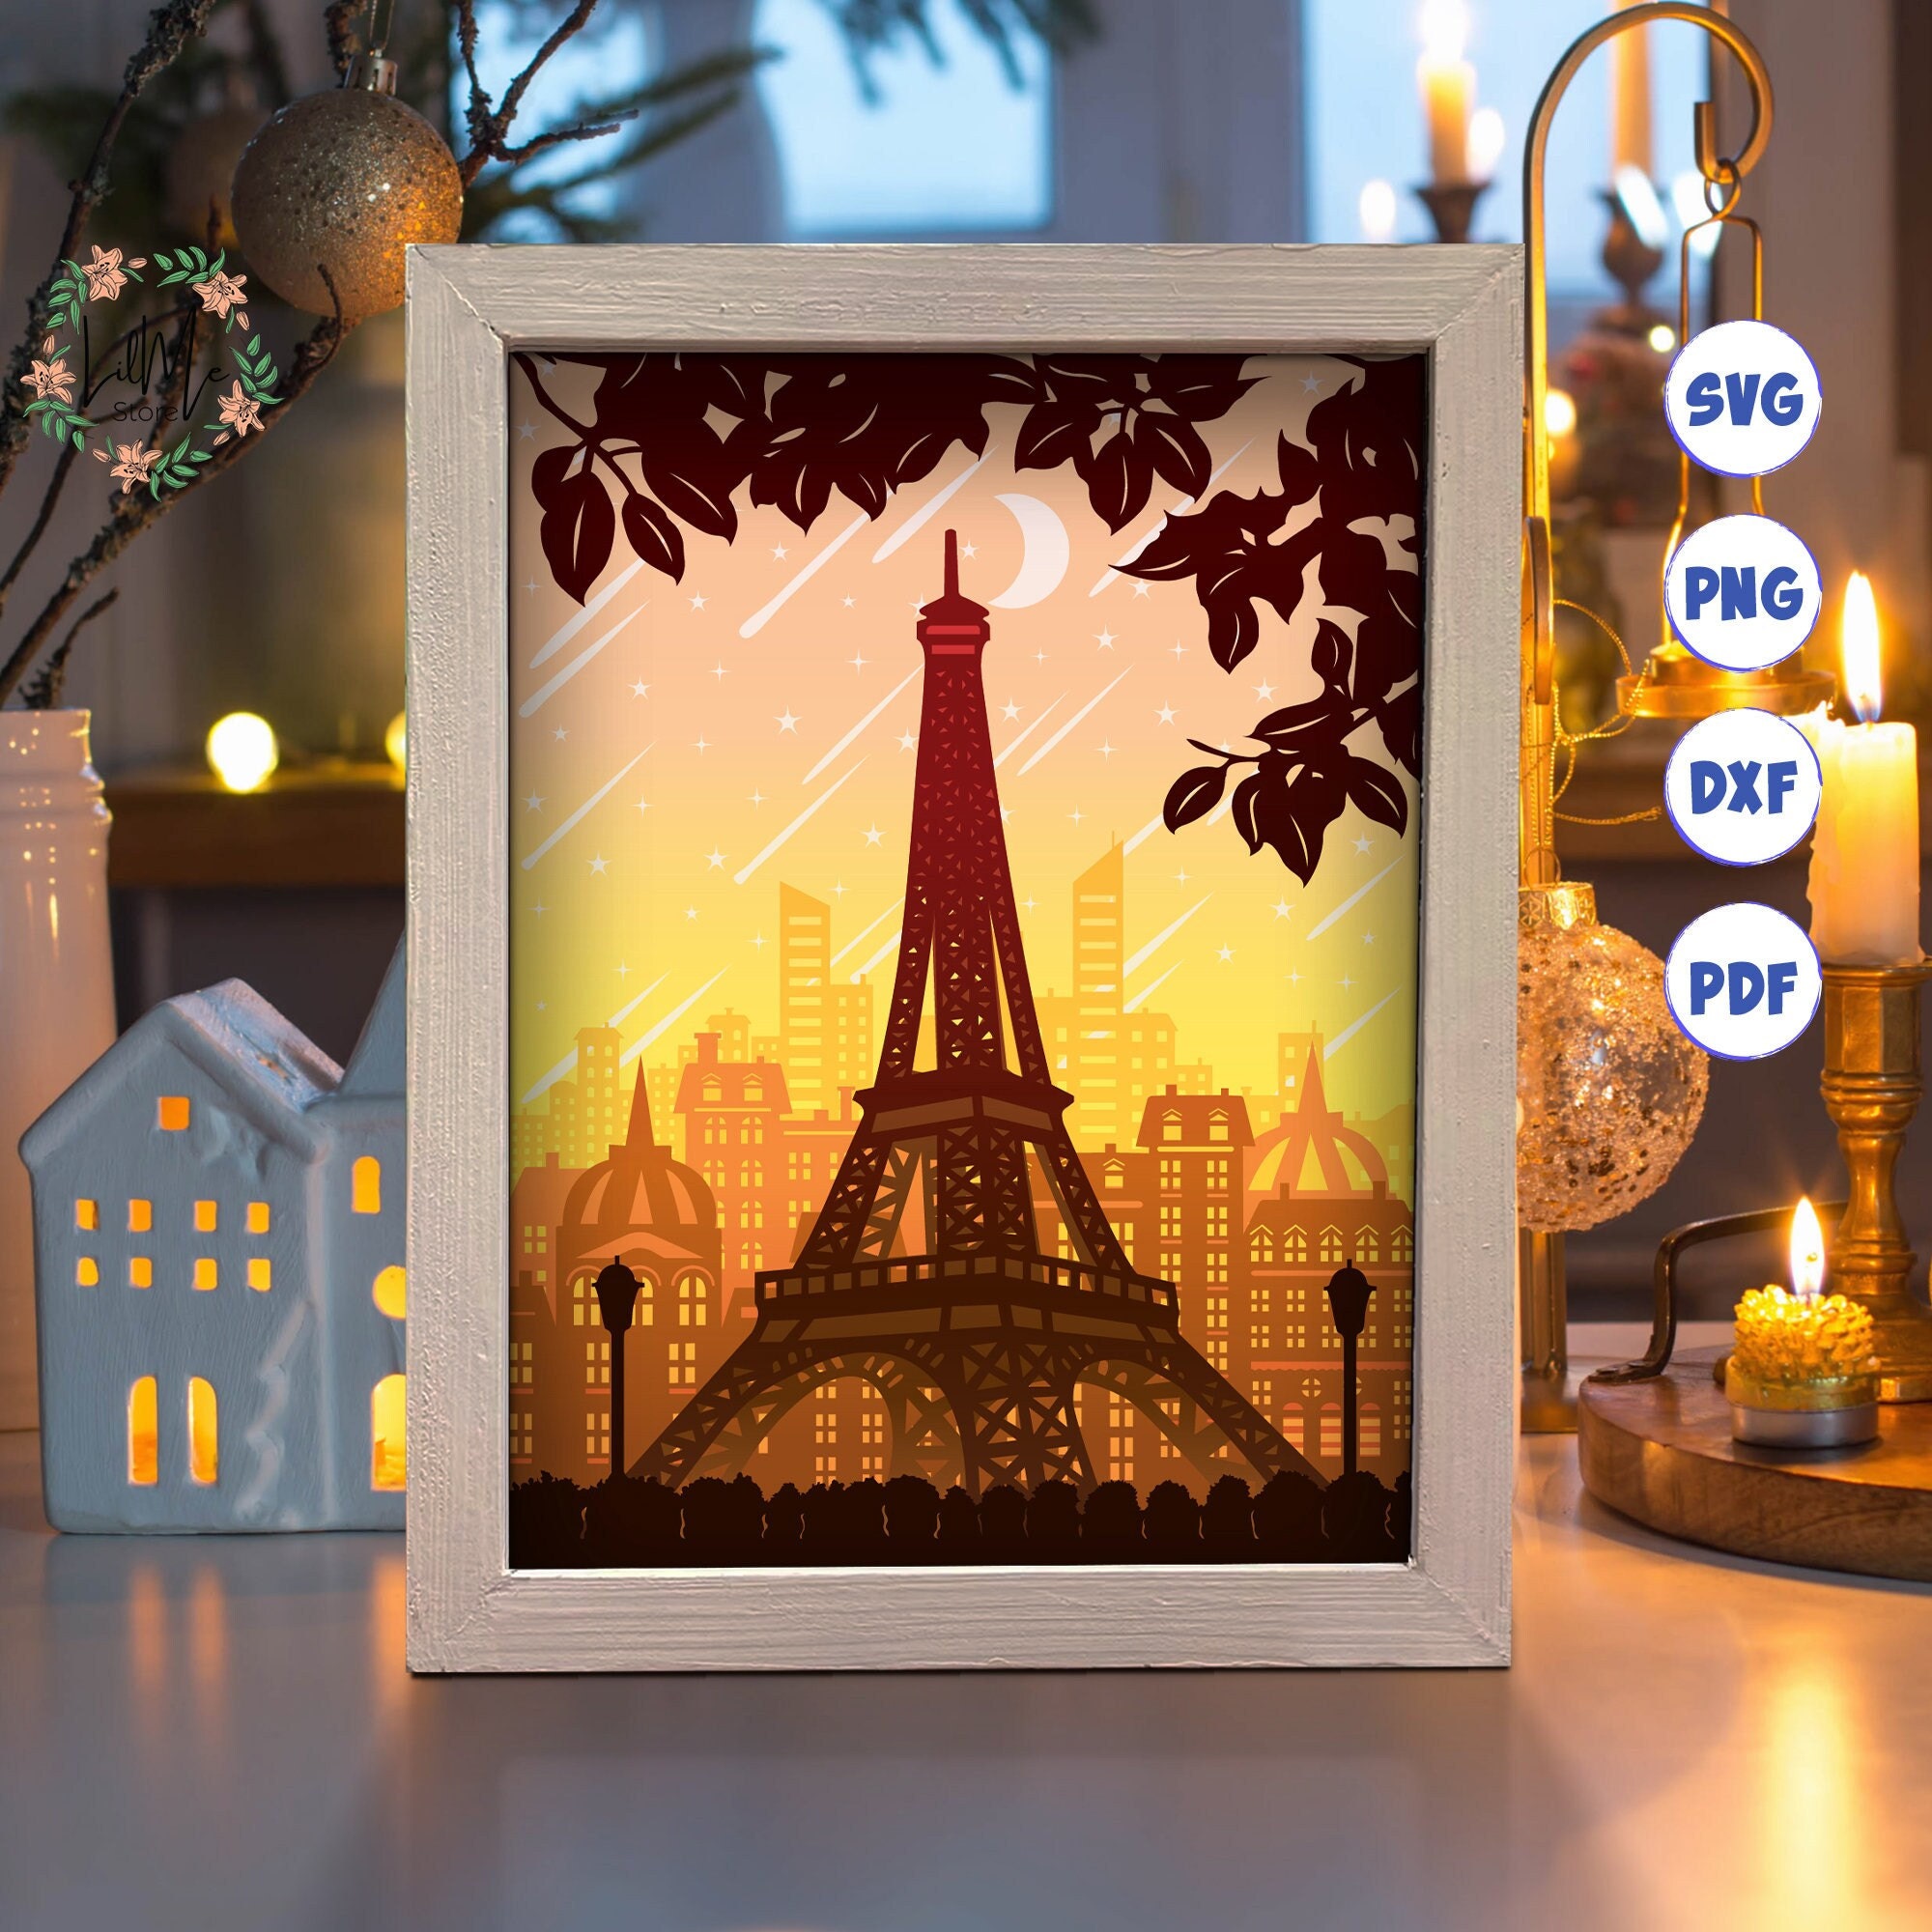 Home Accents Holiday 7 ft. LED Twinkling Eiffel Tower Christmas Decoration